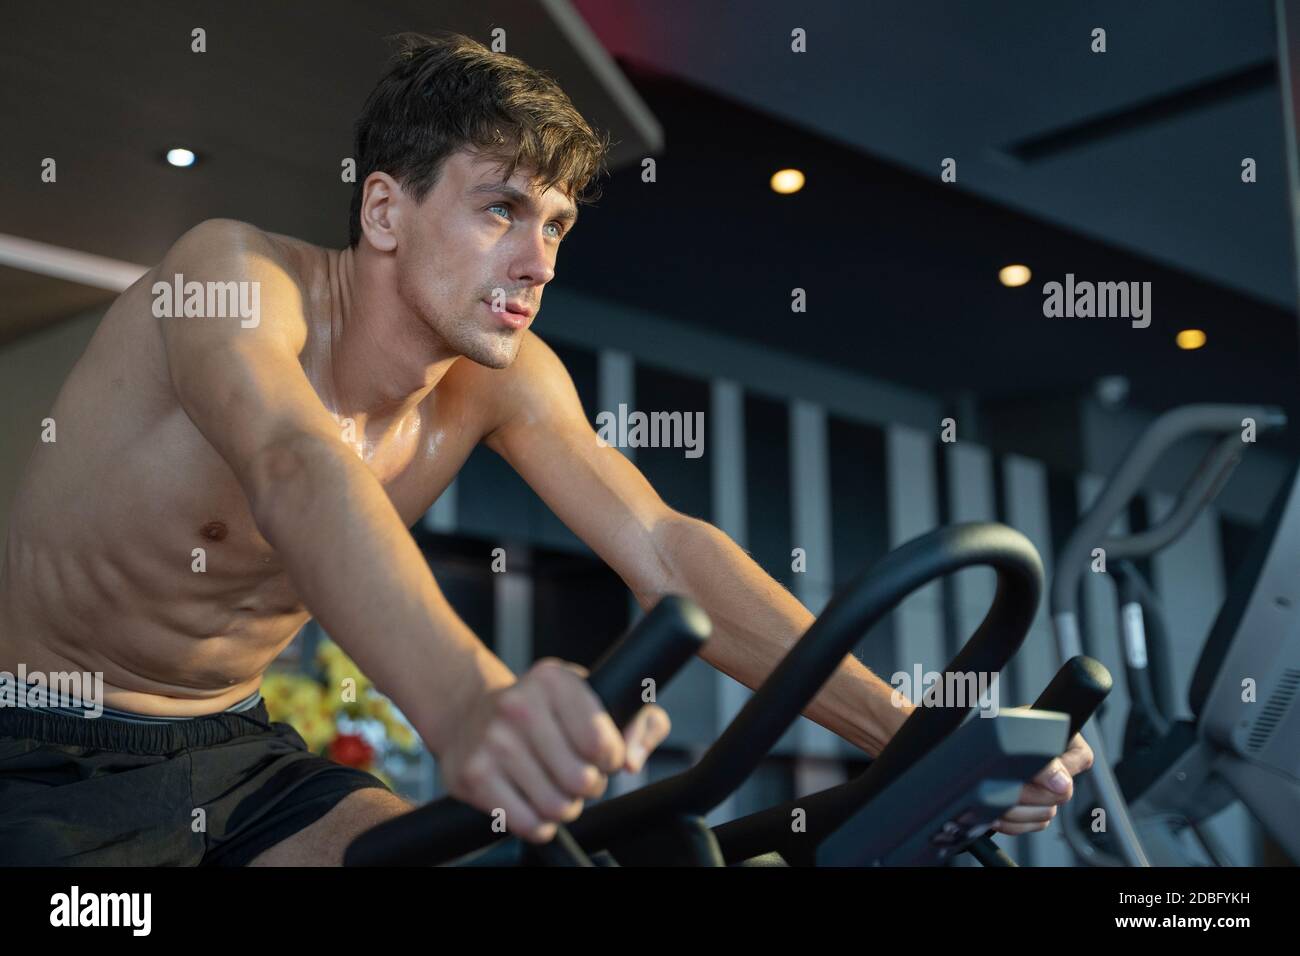 Portrait of man in Exercising class in gym. Stock Photo